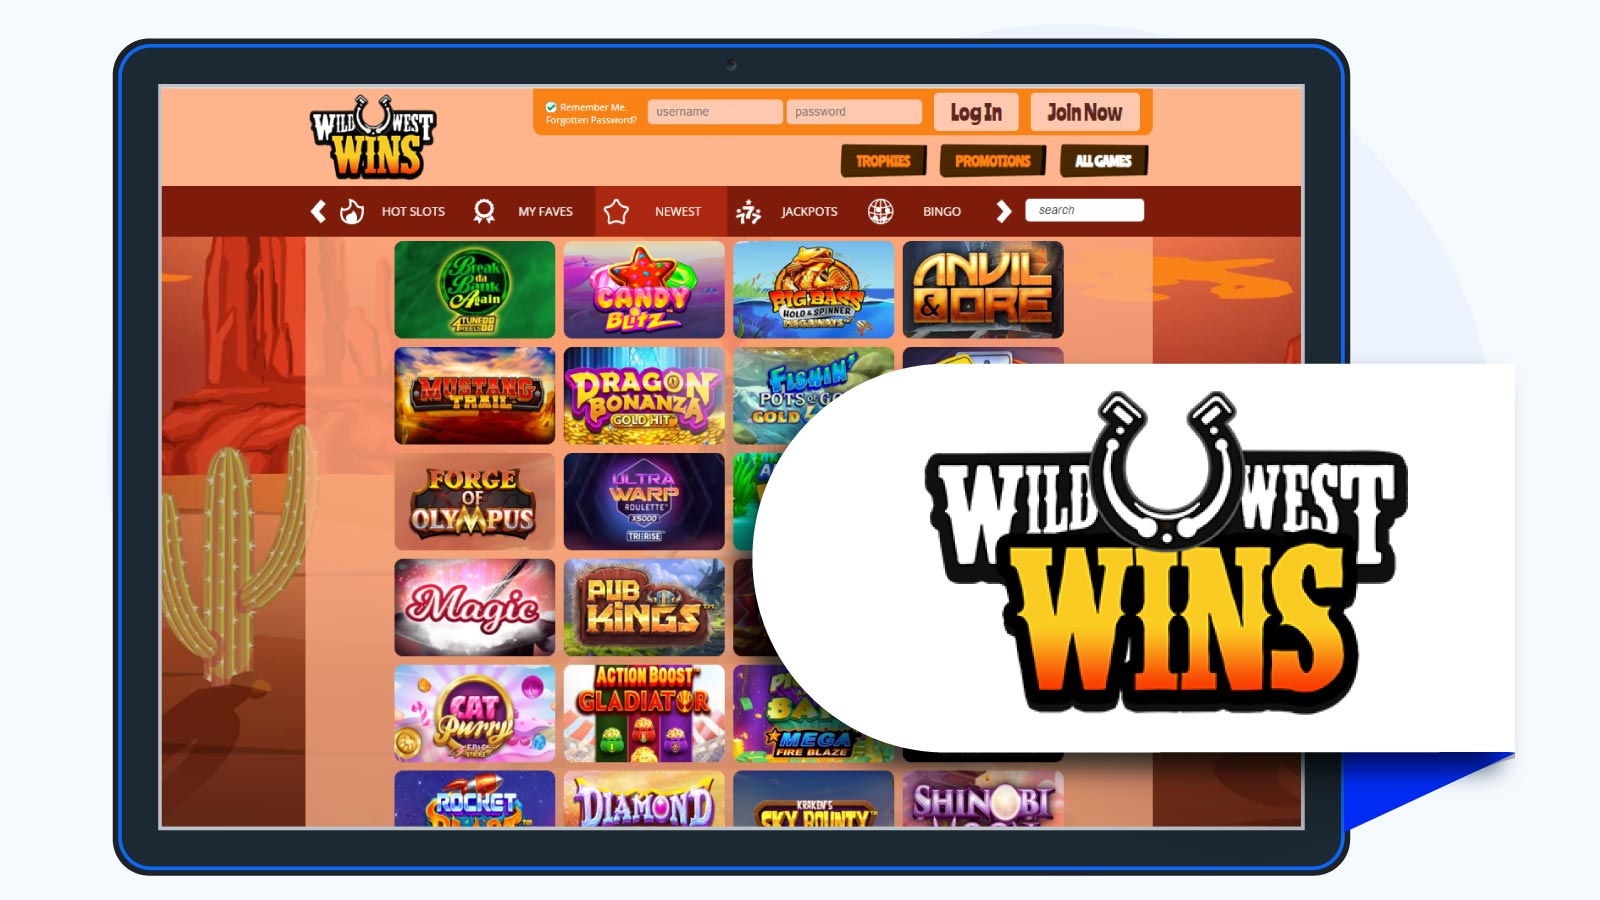 Wild West Wins 4th of Our Newest Casino Sites